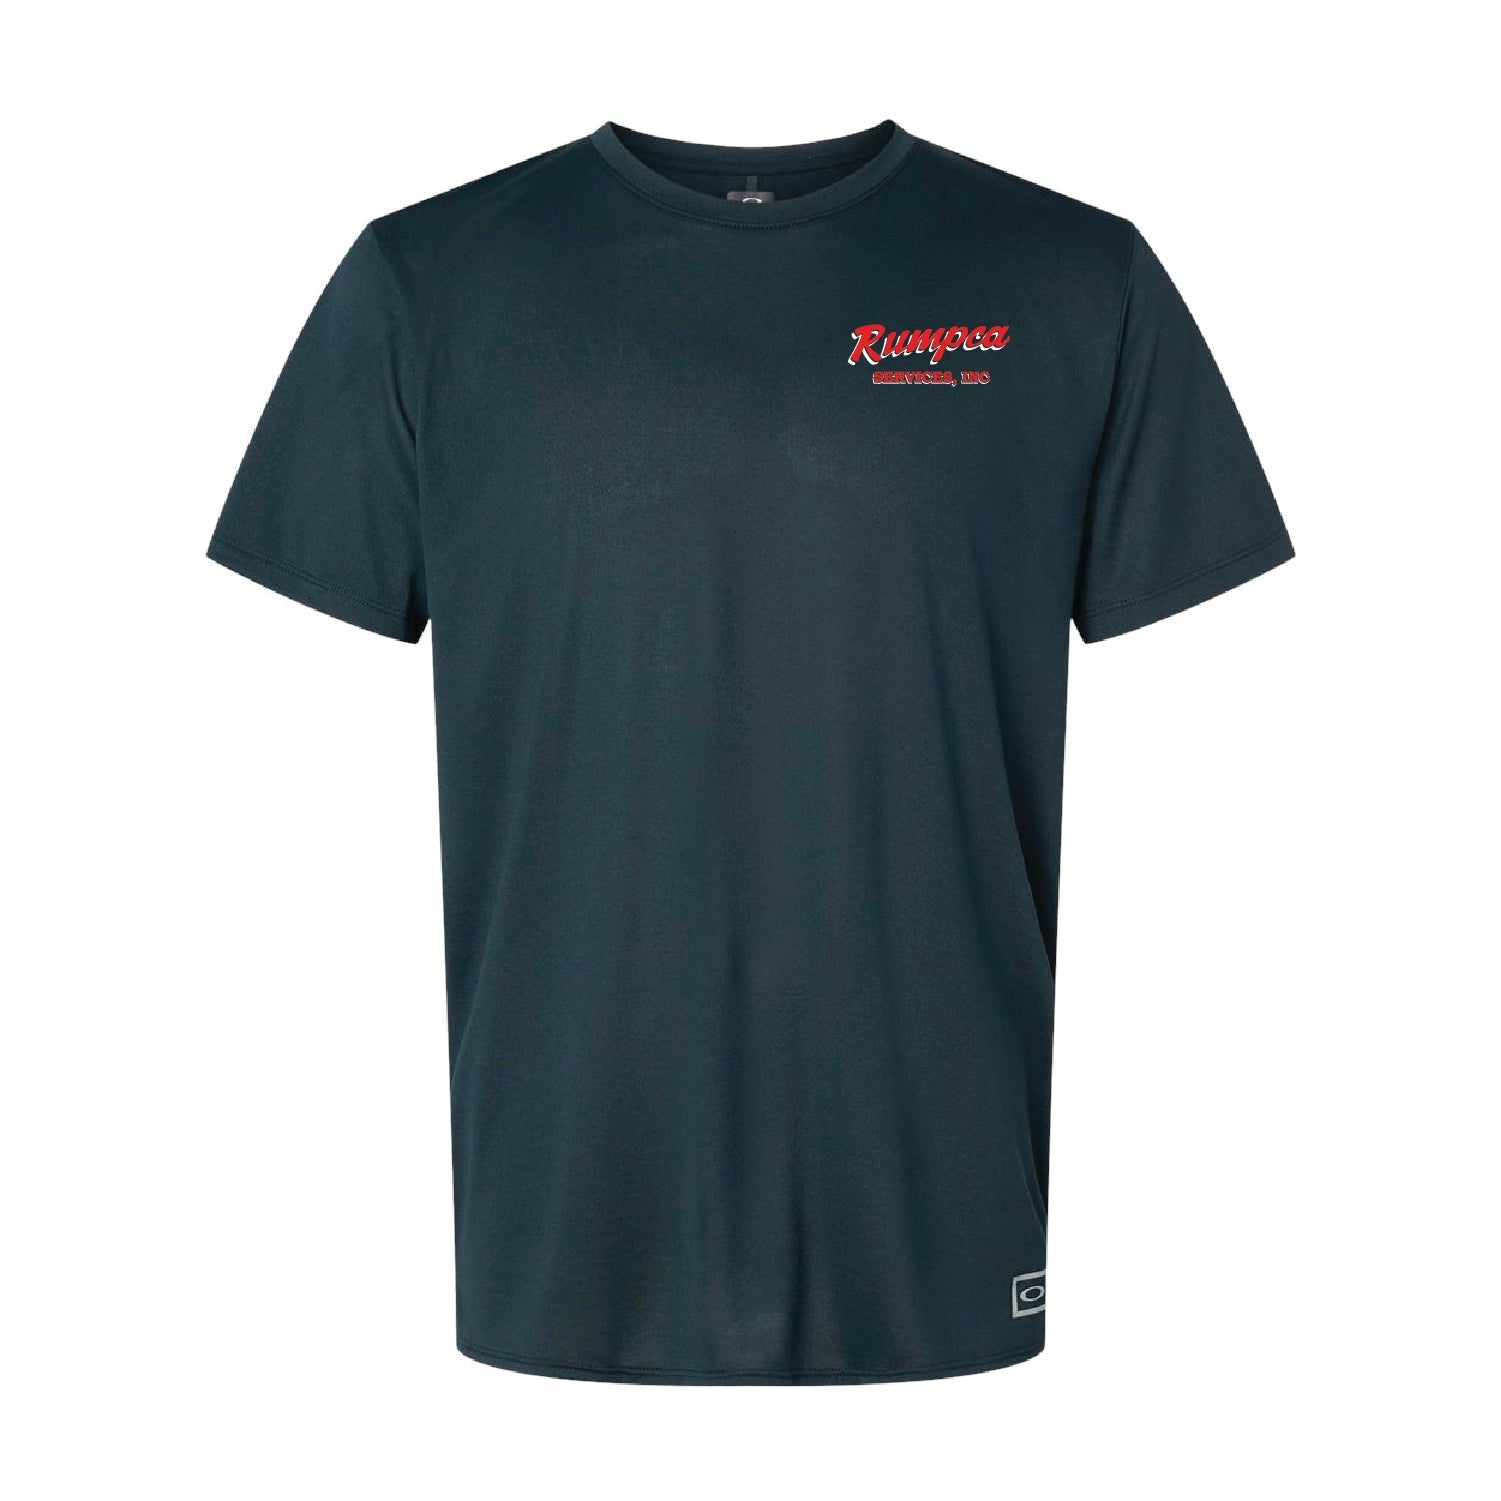 Rumpca Services Team Issue Hydrolix T-Shirt - DSP On Demand